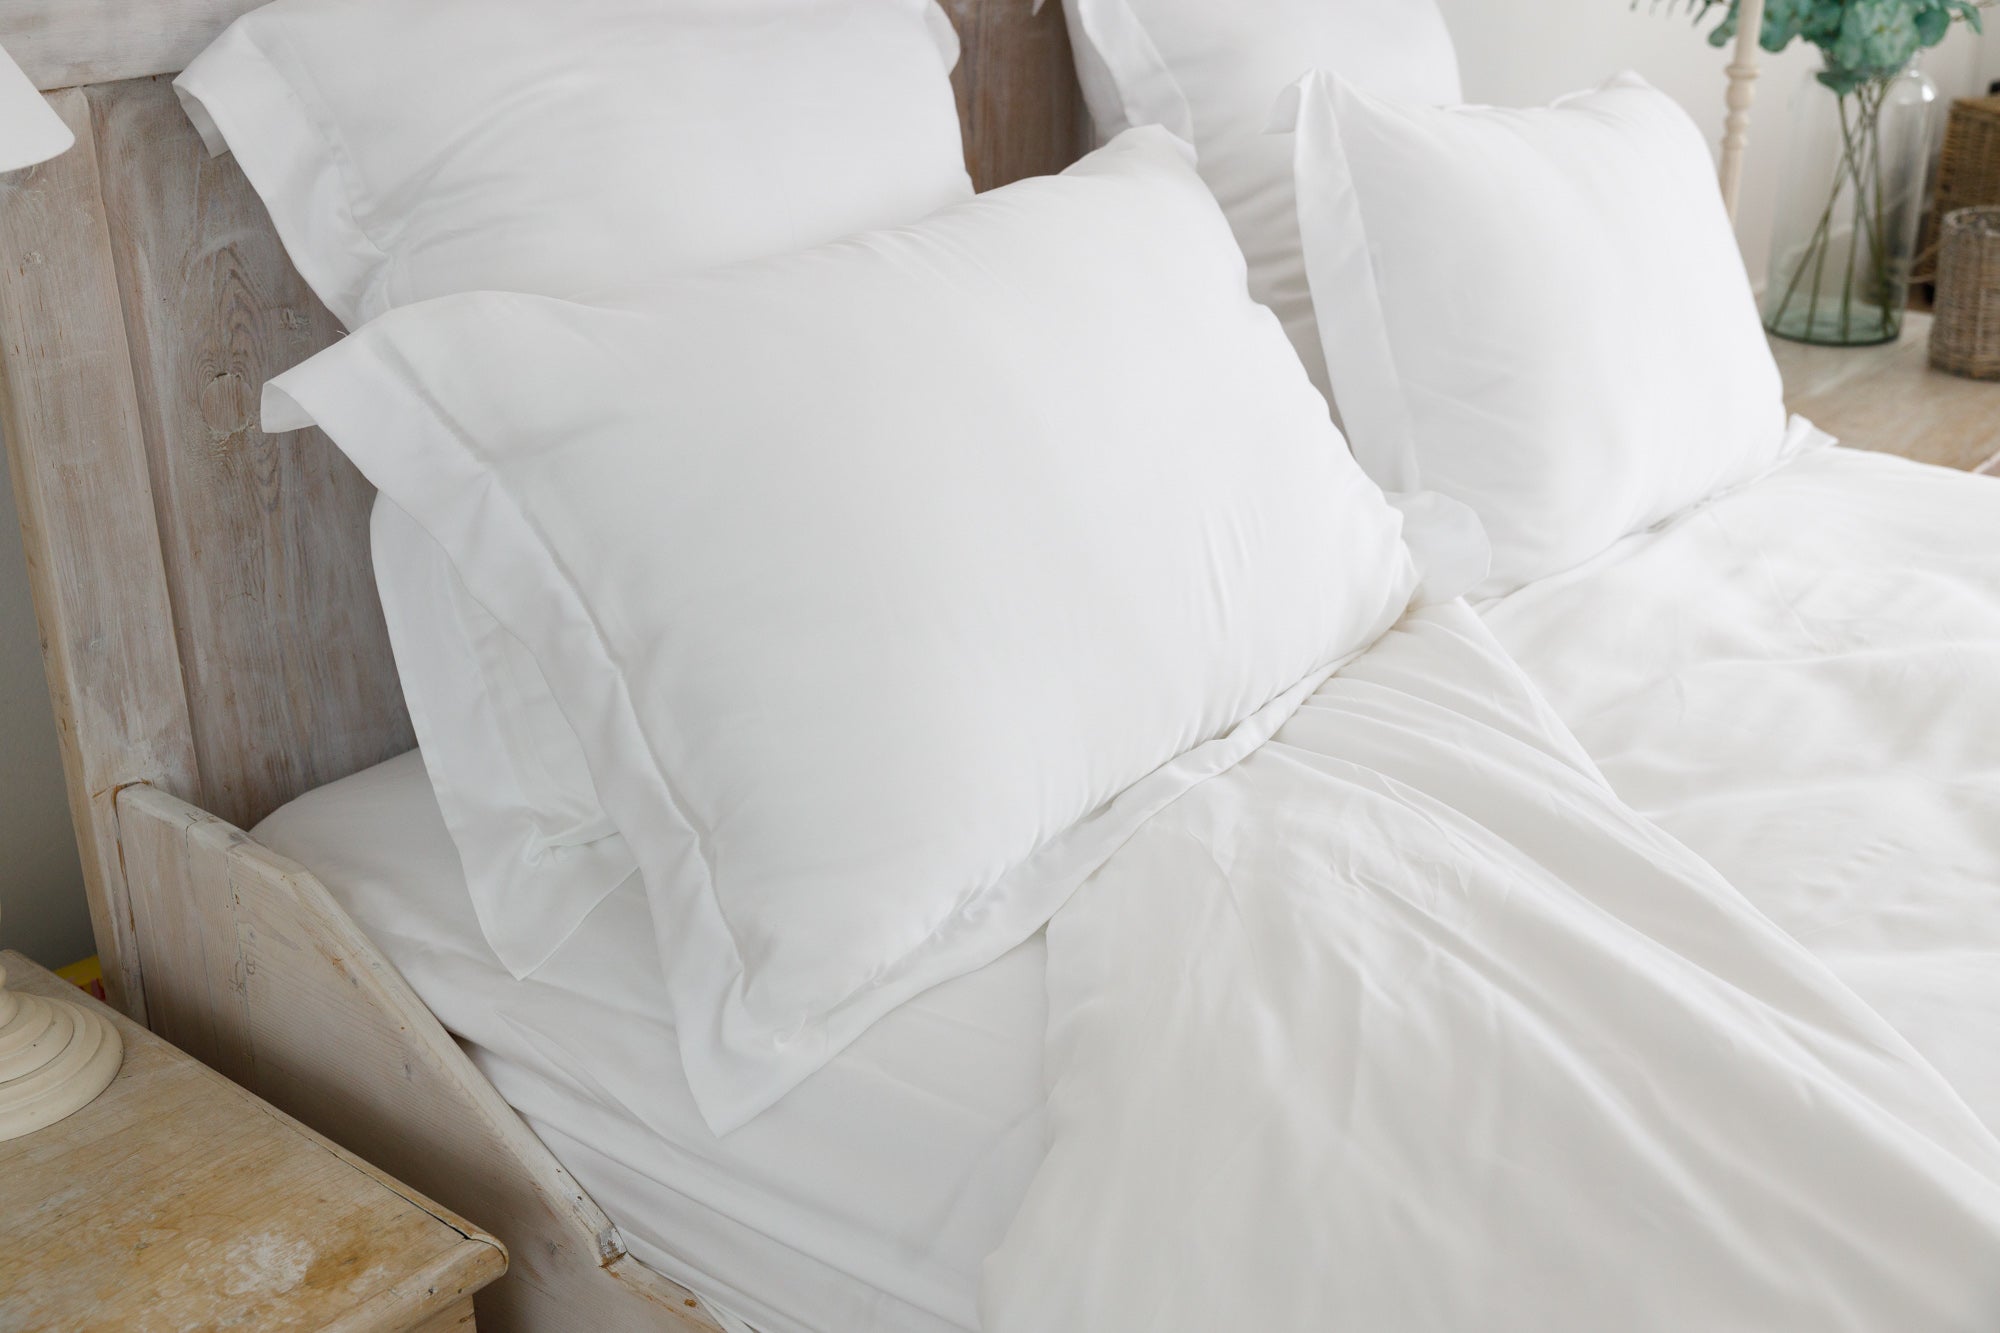 How to Wash White Sheets & Keep them White Without Bleach - Sunday